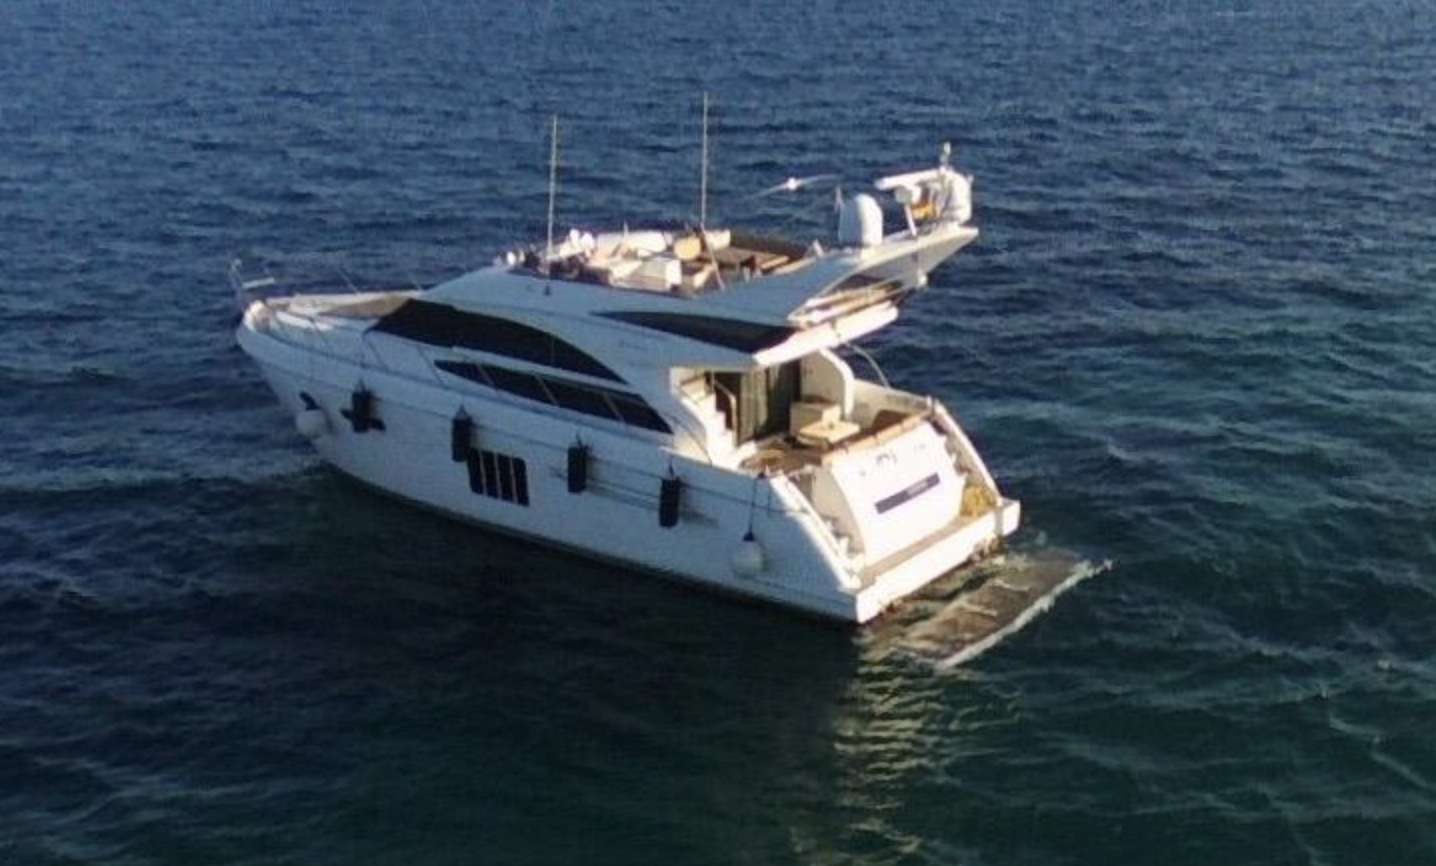 Princess 64 - Motor Boat Charter France & Boat hire in France French Riviera Frejus Port Fréjus 2